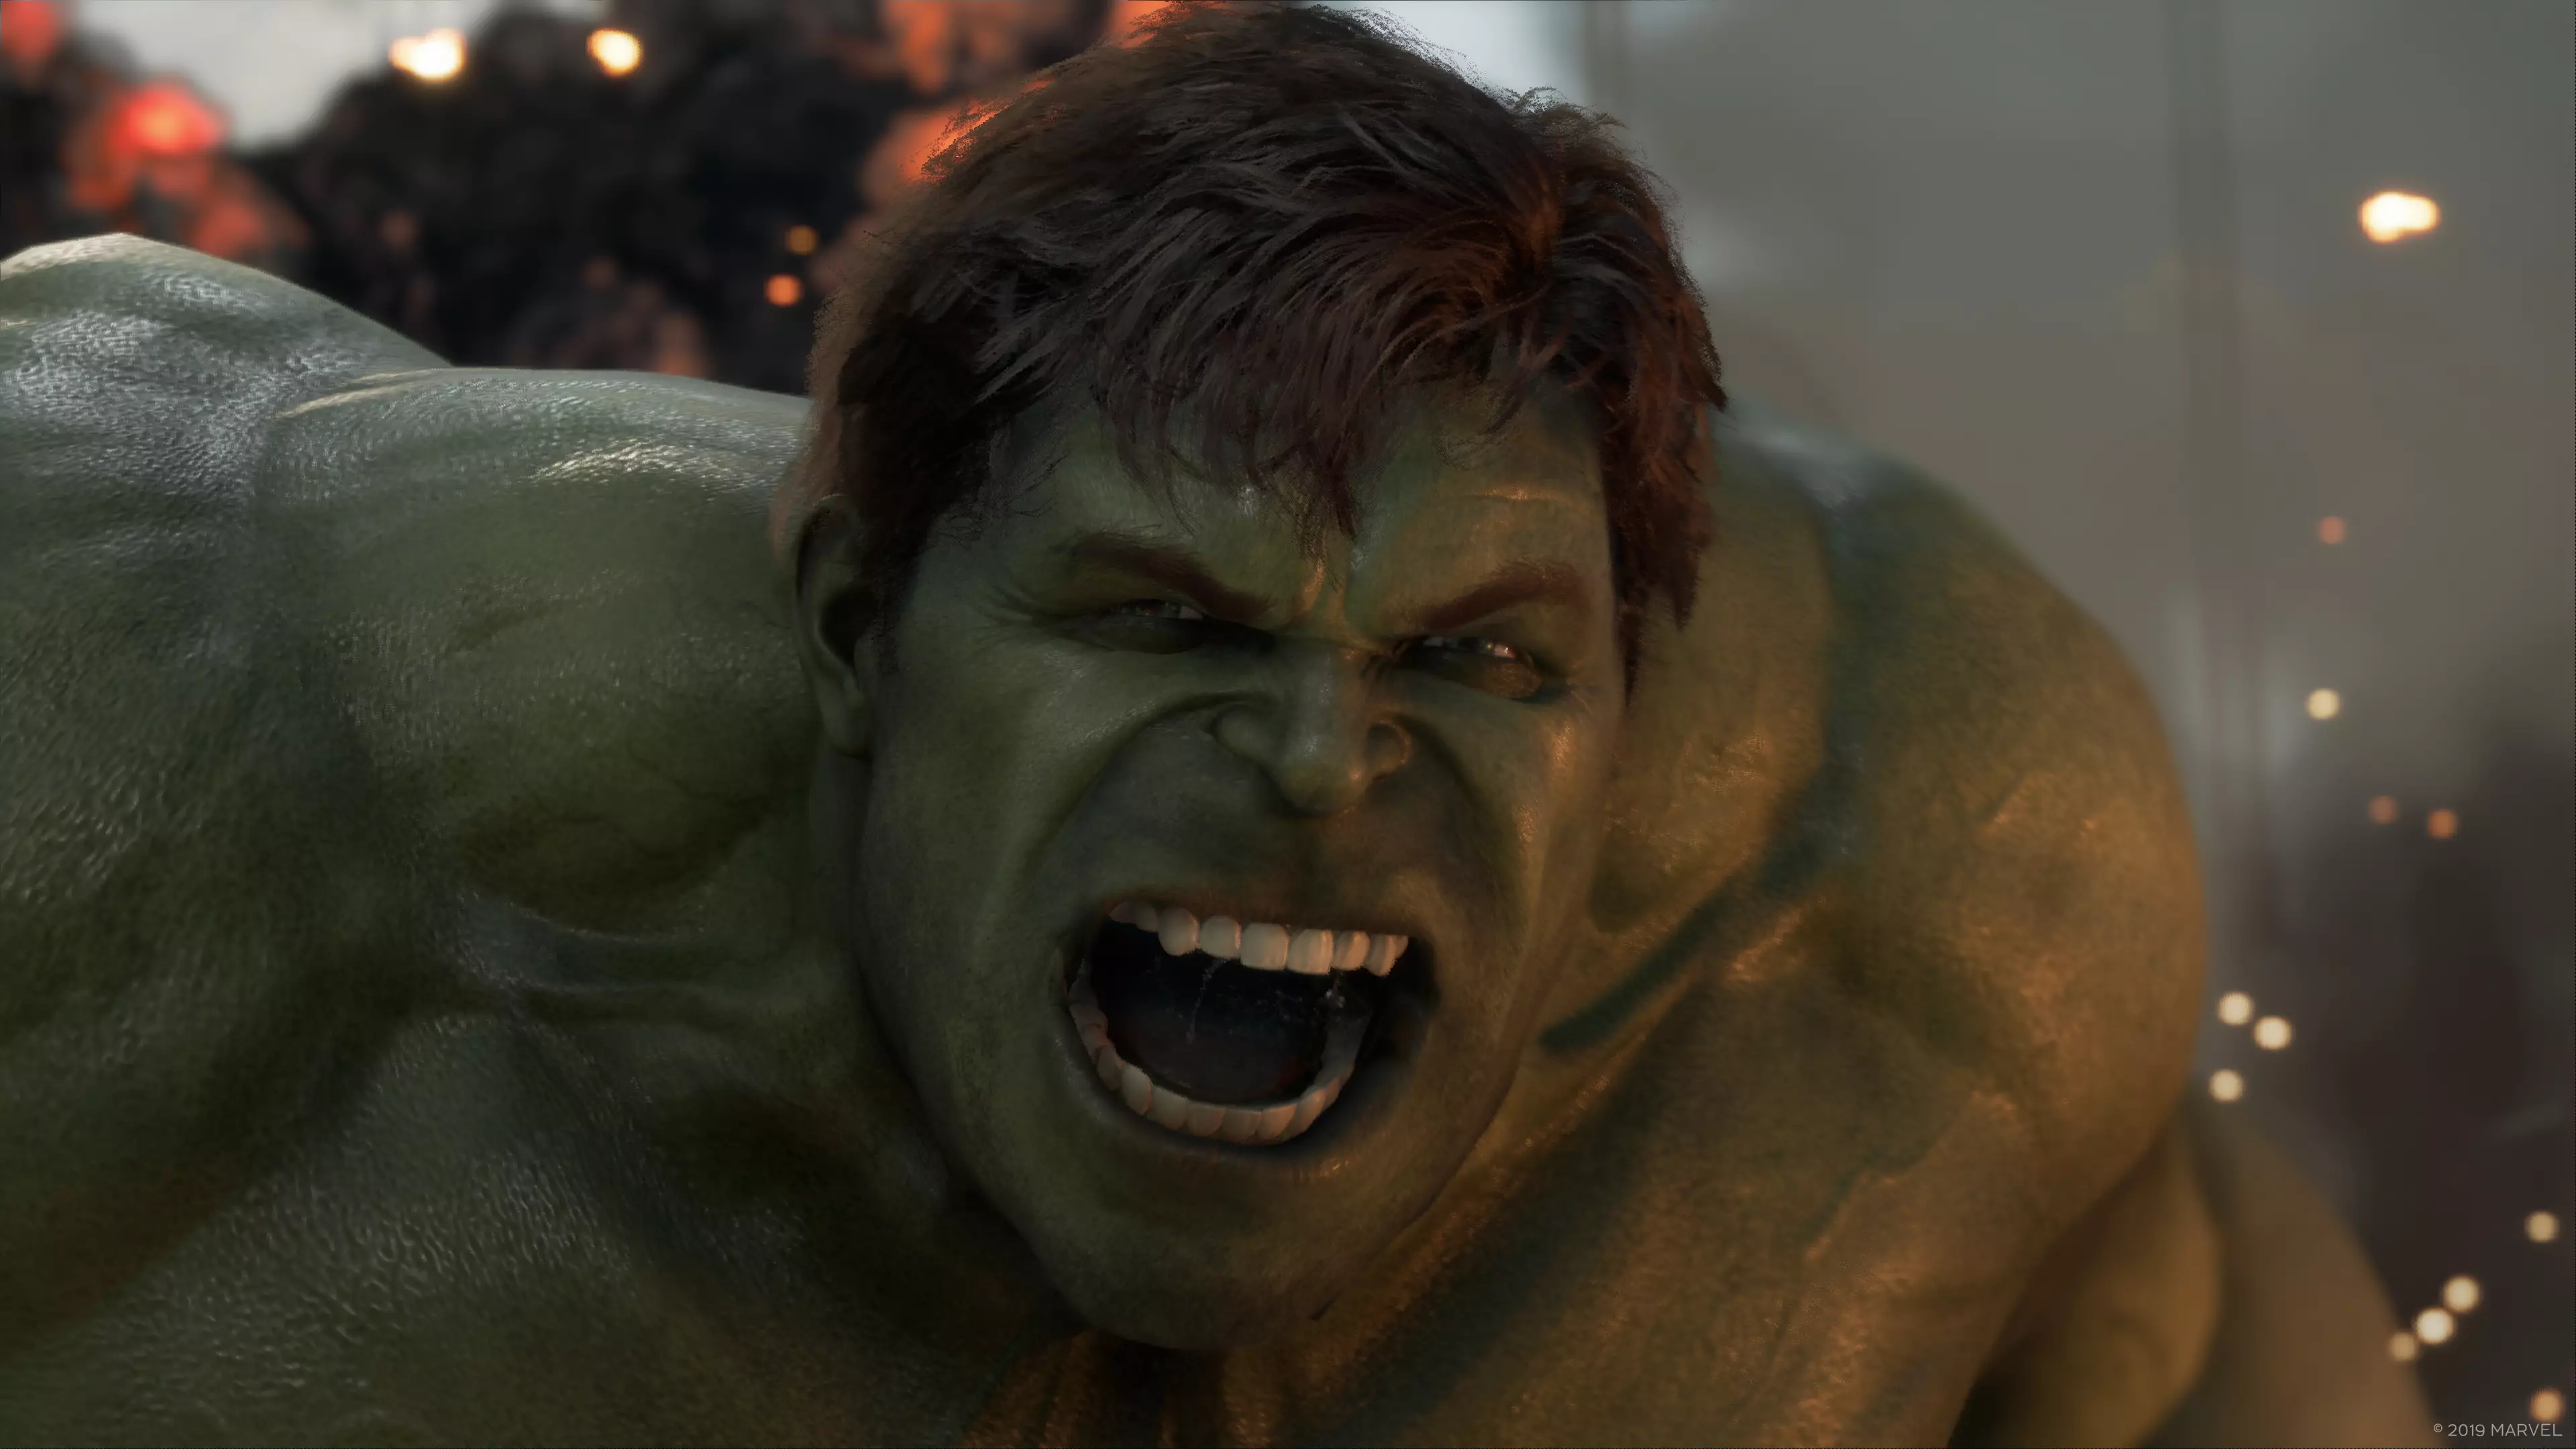 HULK ANGRY WITH CONFUSION